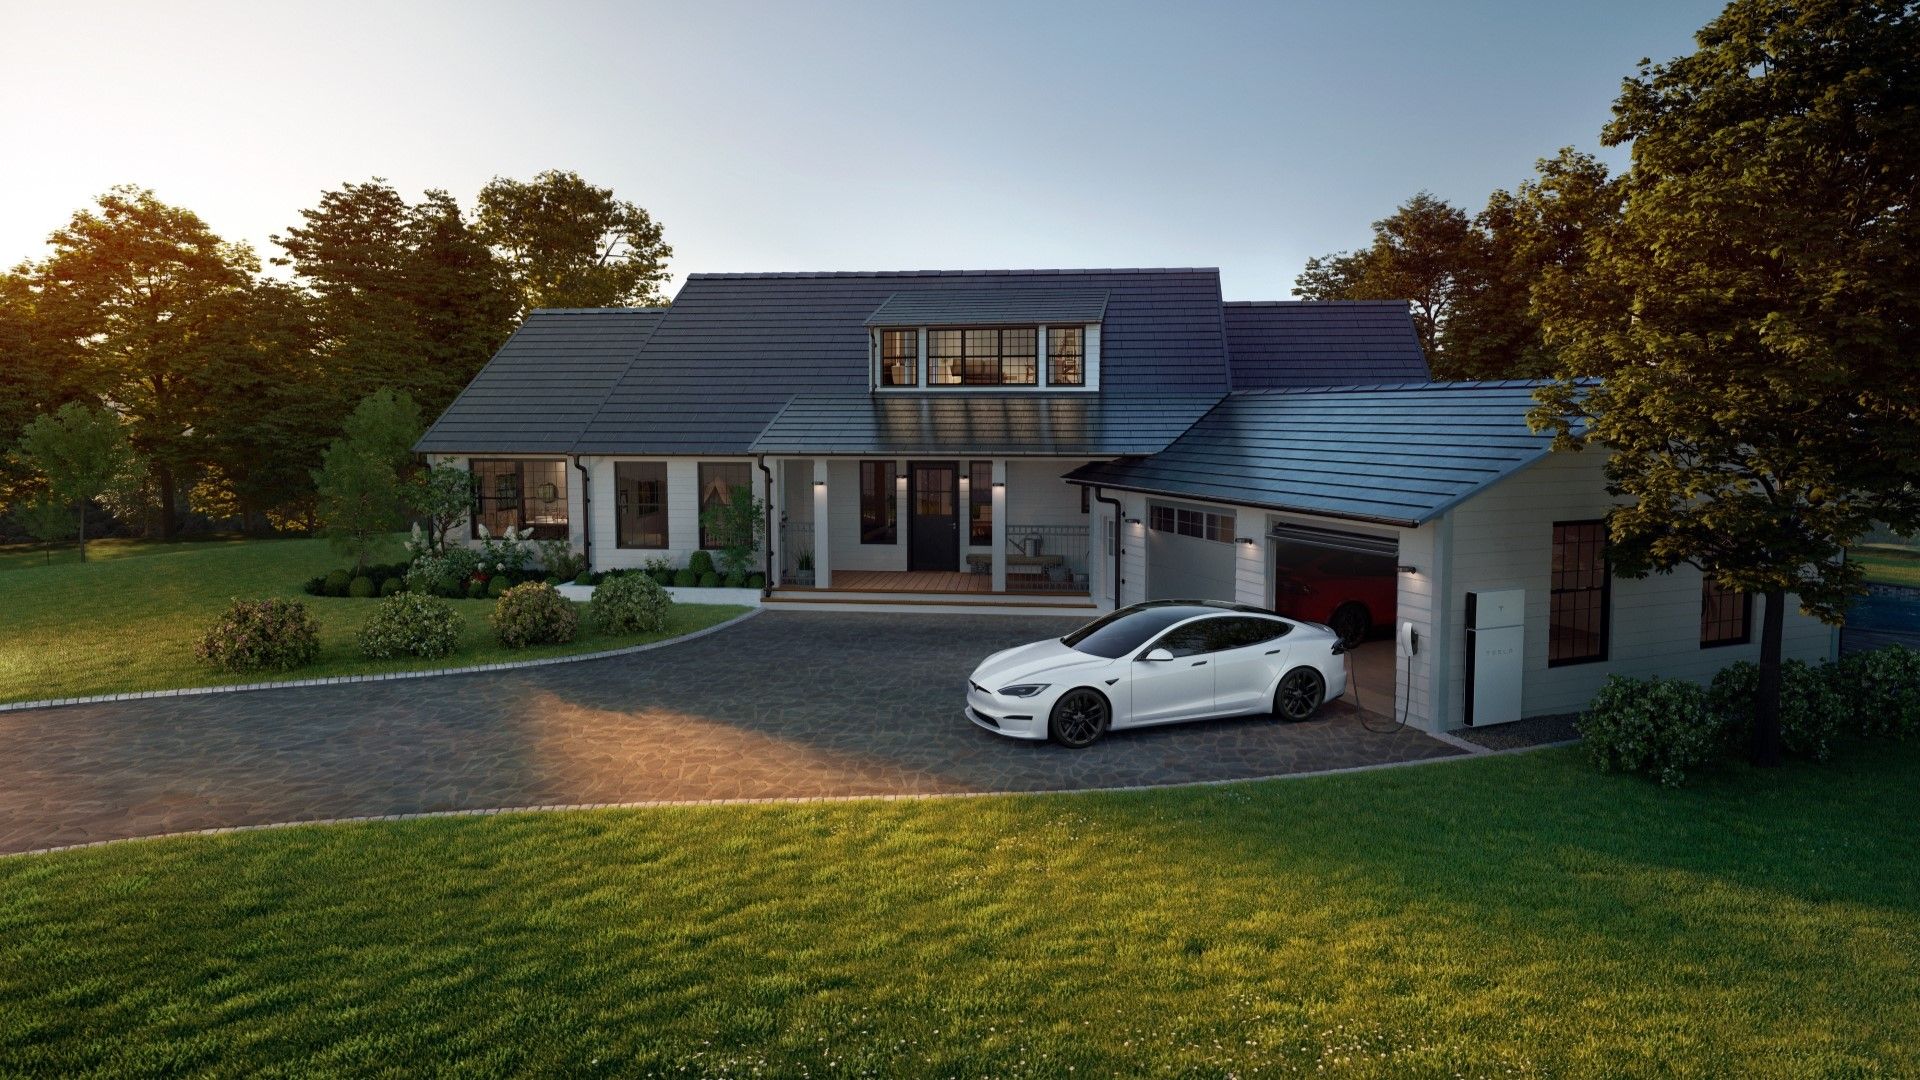 Solar Roof and Tesla Model S